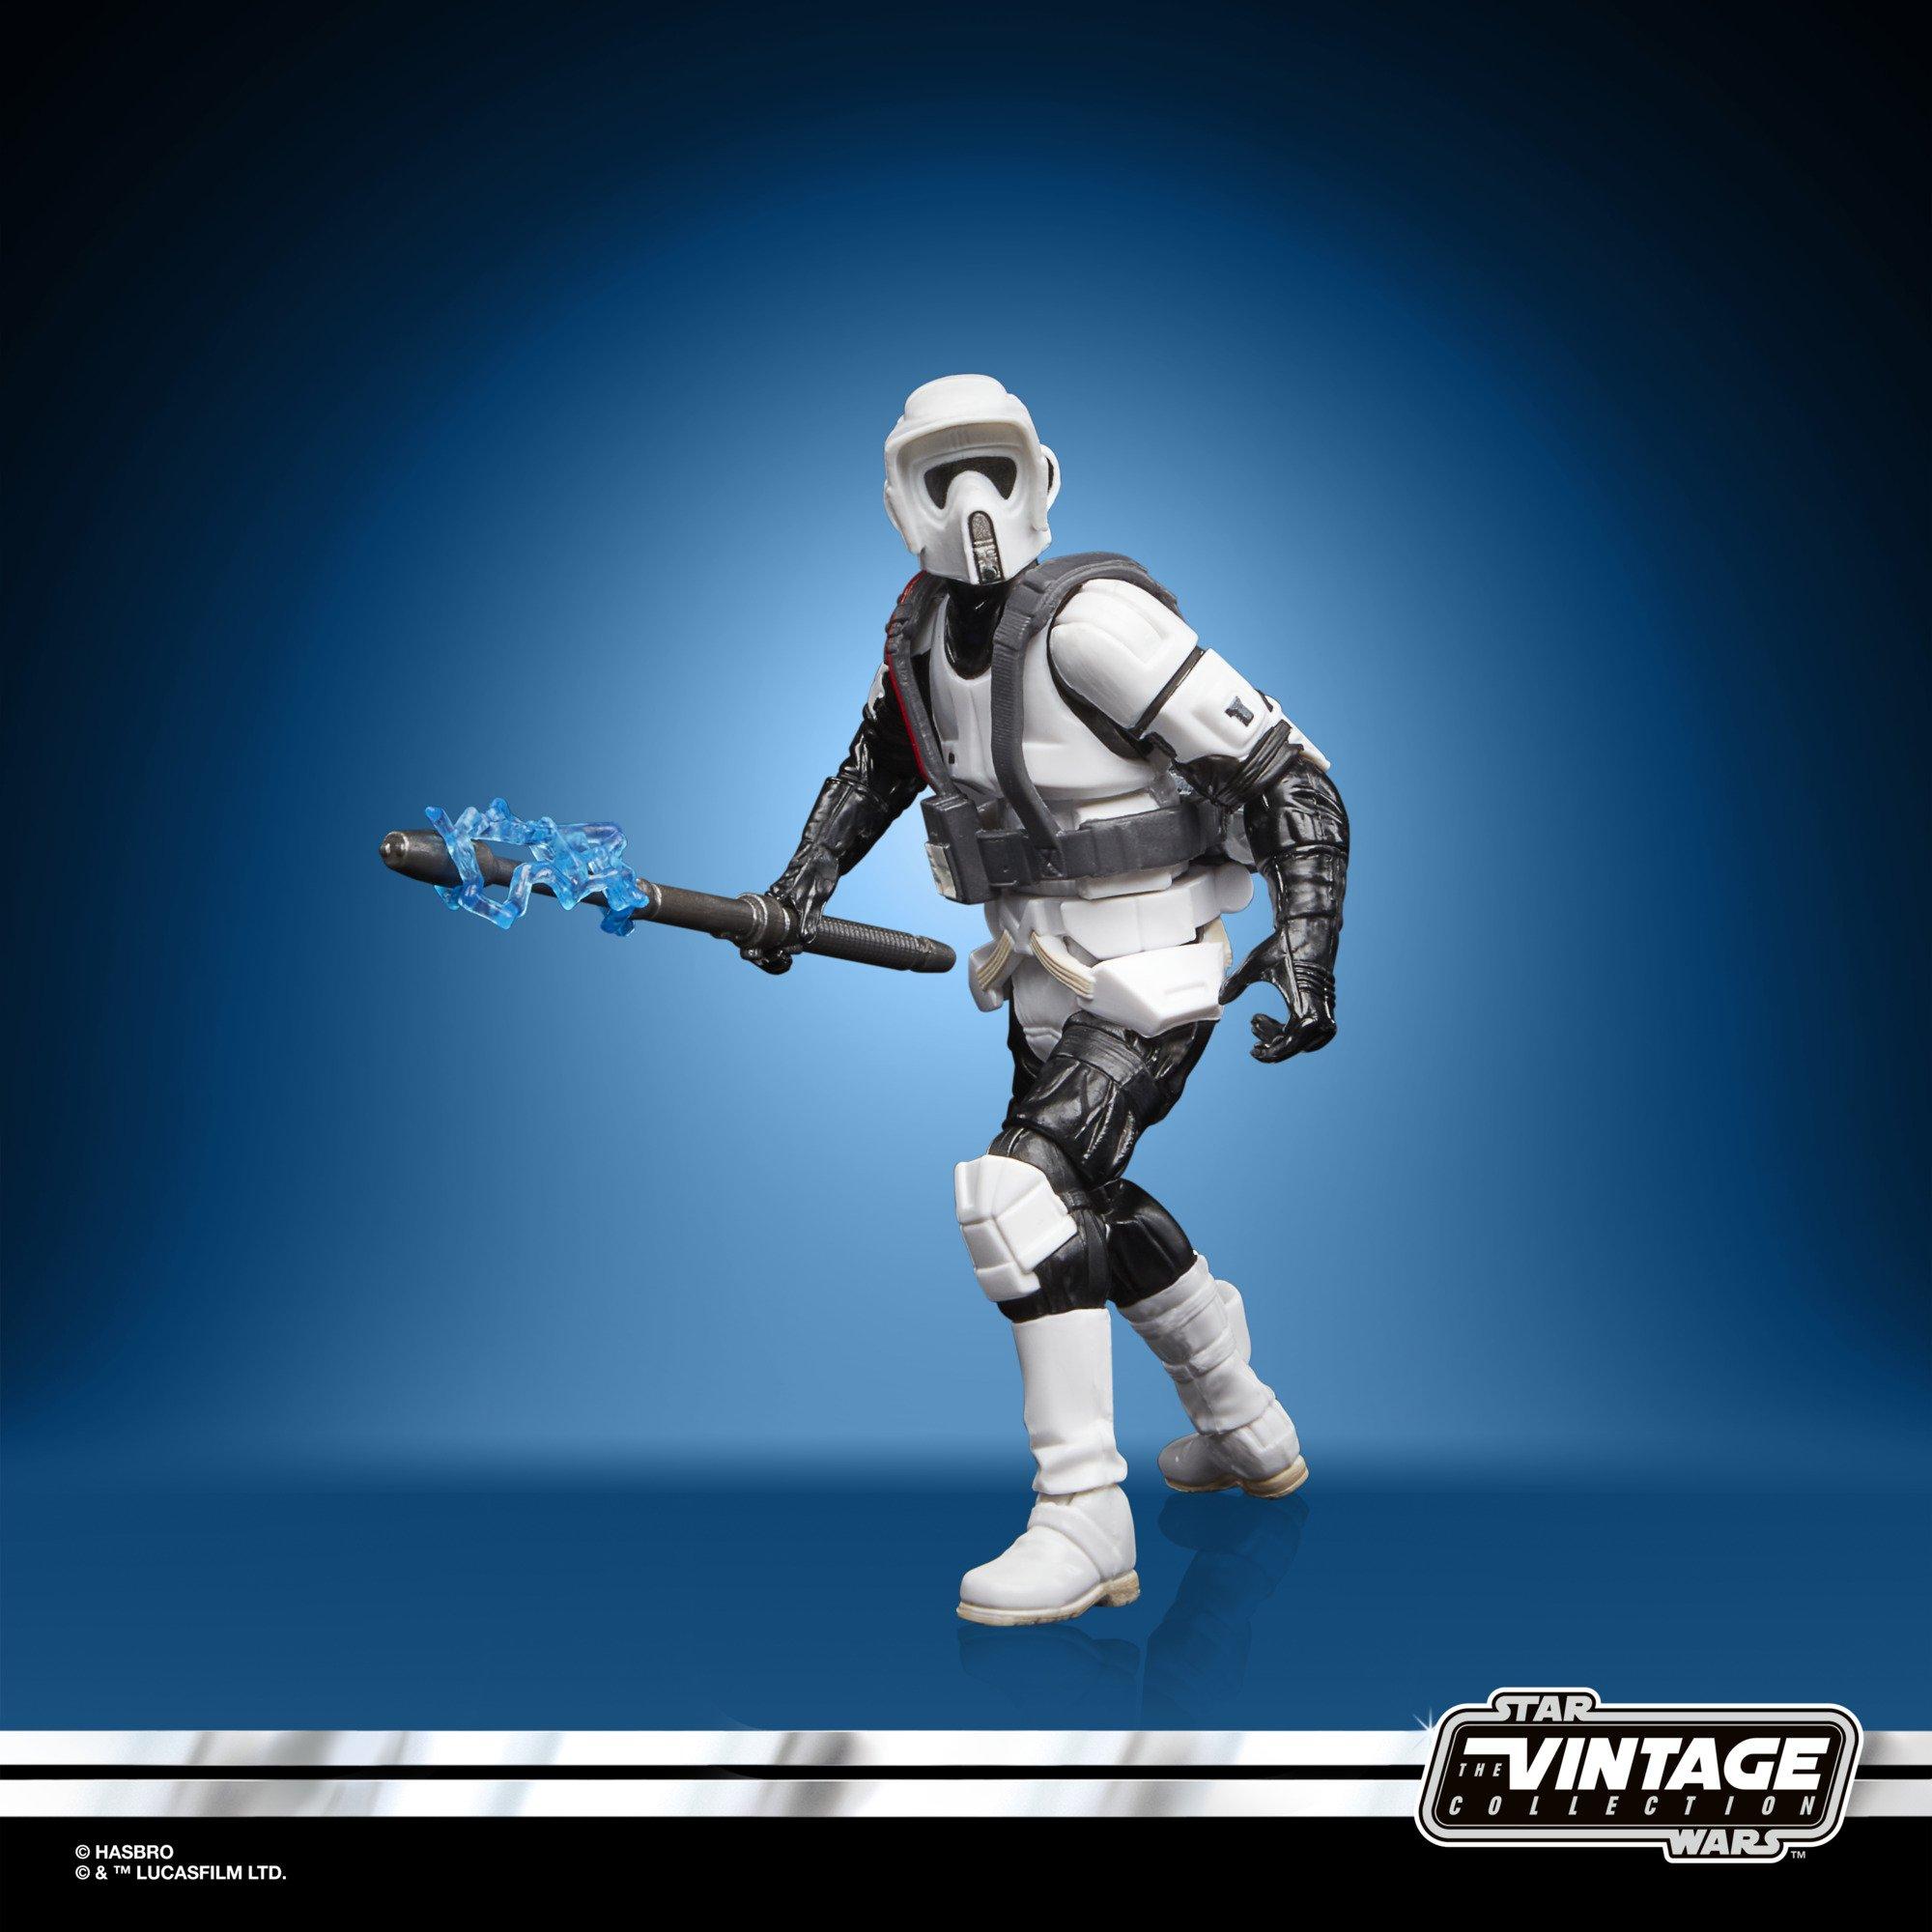 Star Wars Epic Battle SCOUT TROOPER STORMTROOPER 3.75" figure hasbro collect toy 